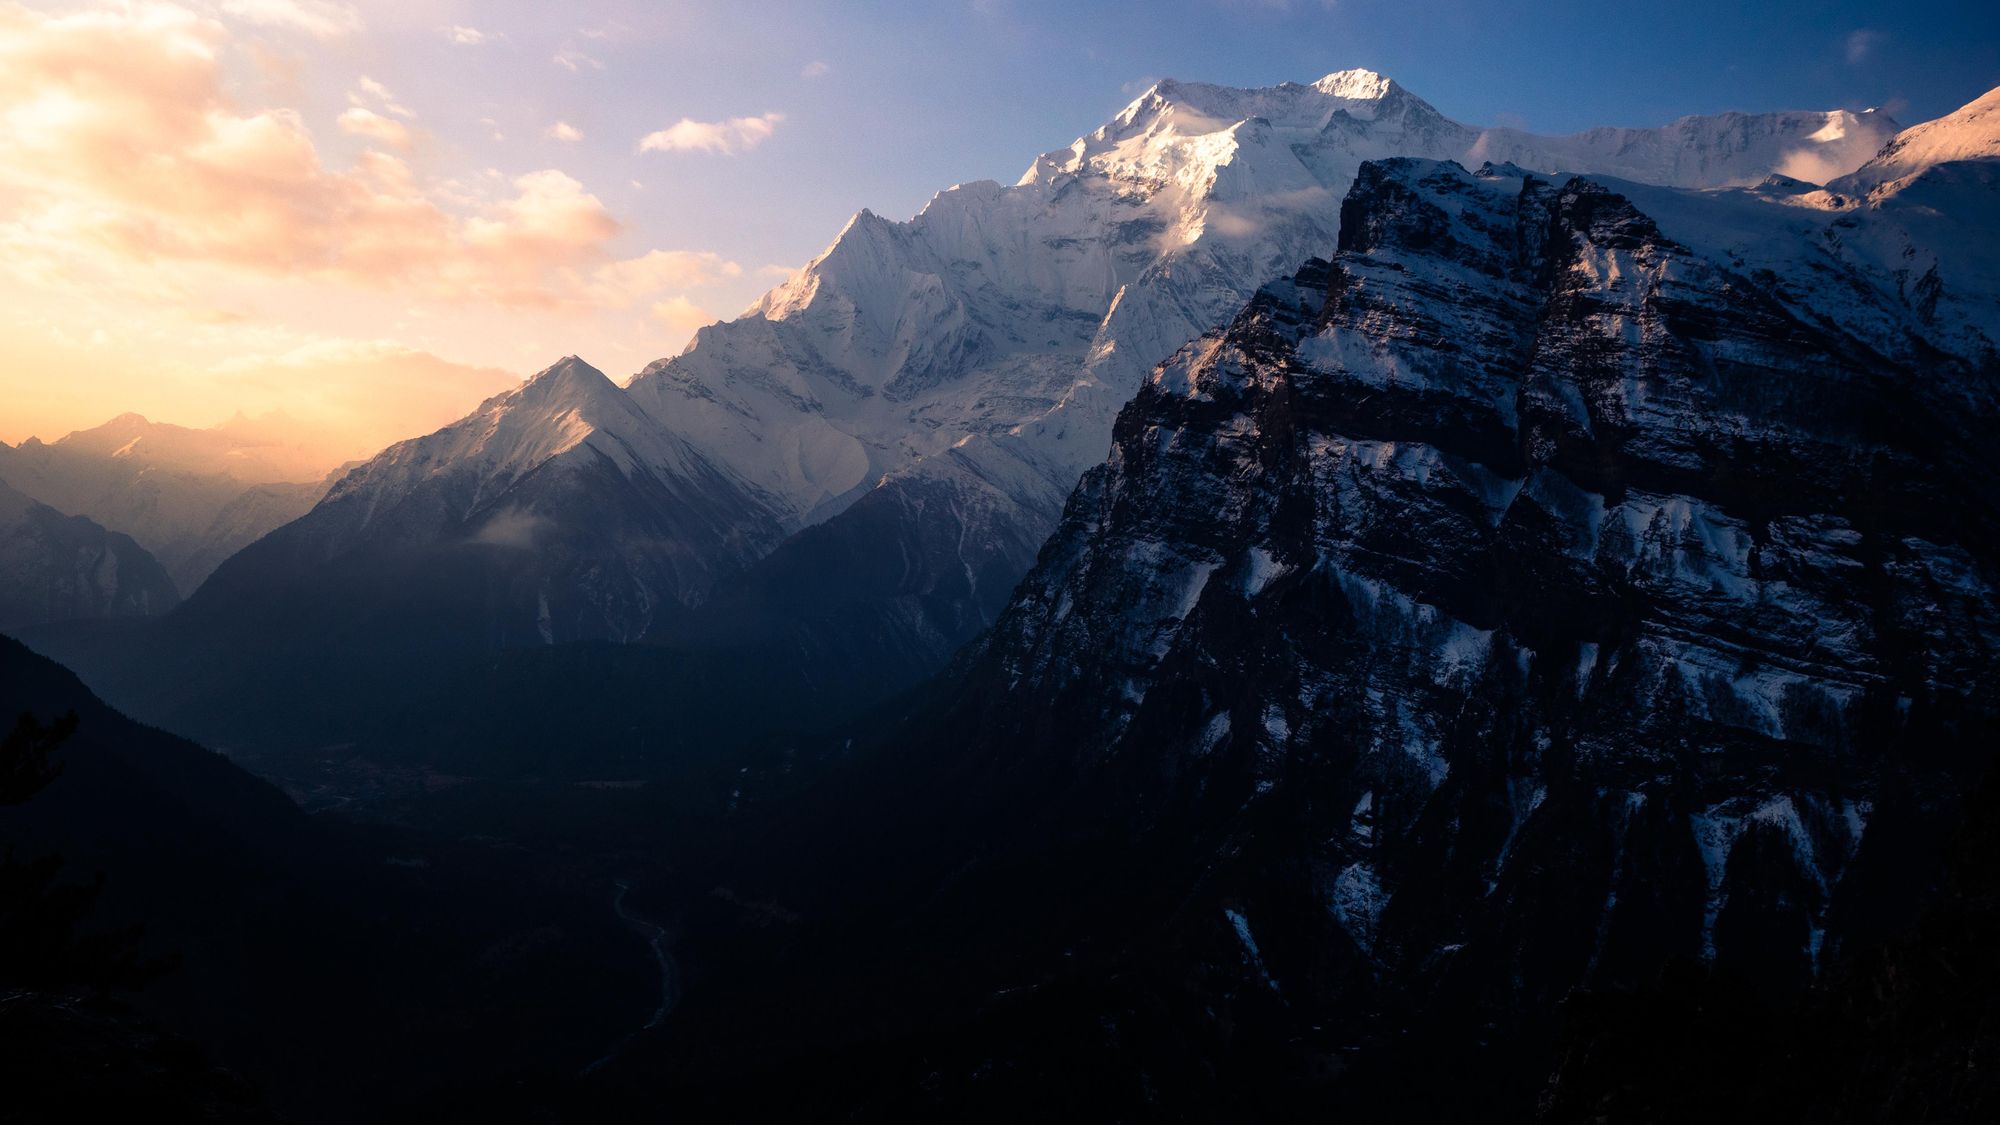 The highest mountains in the world can be seen along the Annapurna Circuit route. Photo: Josh Edwards